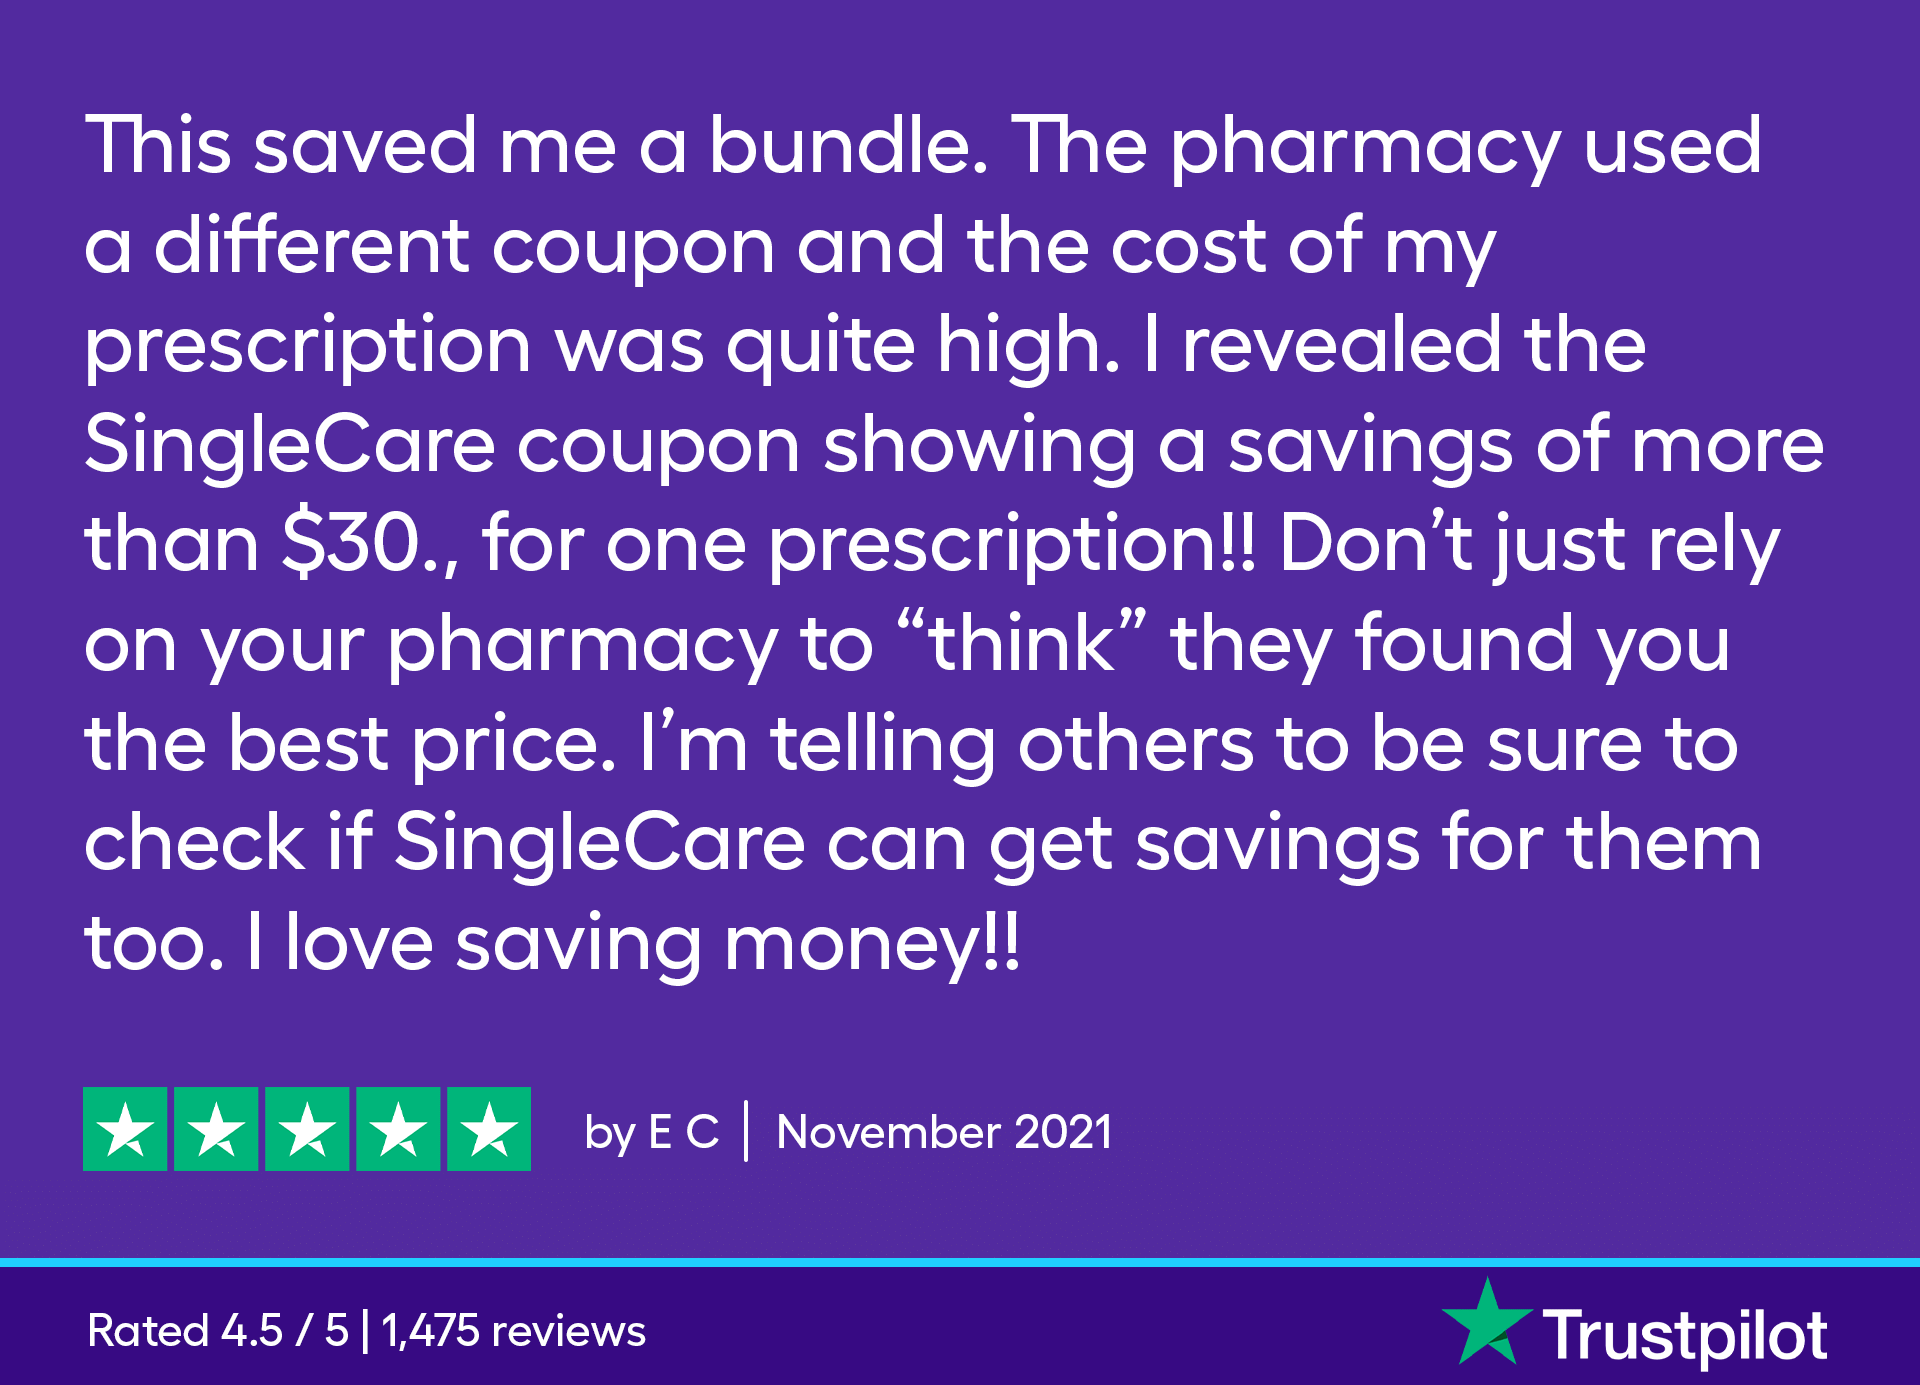 This saved me a bundle. The pharmacy used a different coupon and the cost of my prescription was quite high. I revealed the SingleCare coupon showing a savings of more than $30., for one prescription!! Don't just rely on your pharmacy to "think" they found you the best price. I'm telling others to be sure to check if SingleCare can get savings for them too. I love saving money!!